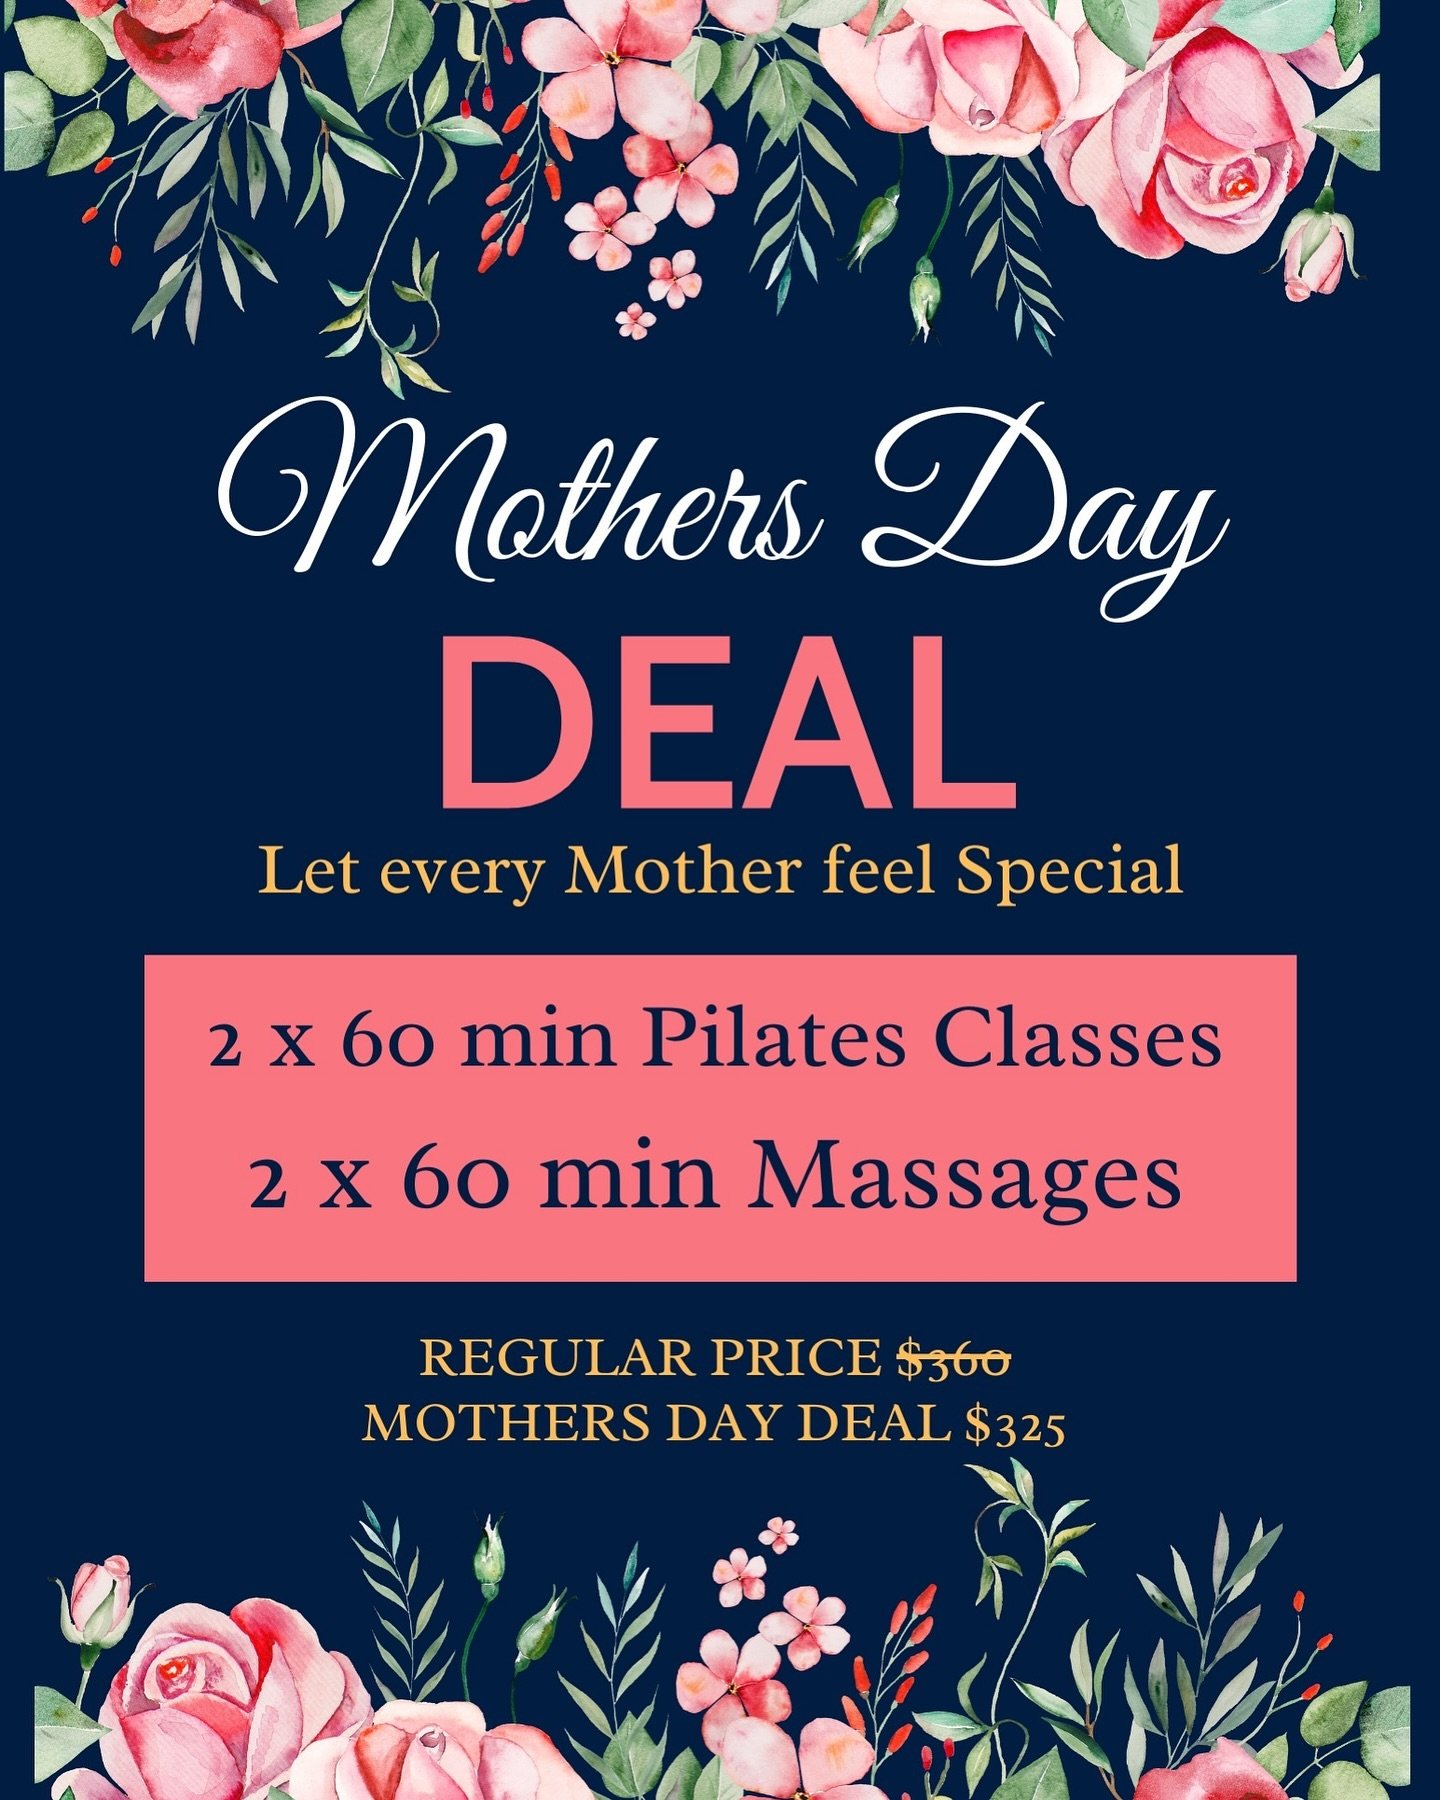 Spoil the most important person in your life this Mother&rsquo;s Day. 🥰
2 x Pilates classes and 2 x 60 minute massages at a discounted bundle price this Mother&rsquo;s Day. 🎉

Call or purchase in clinic. 
Comes with digital mother&rsquo;s day card 